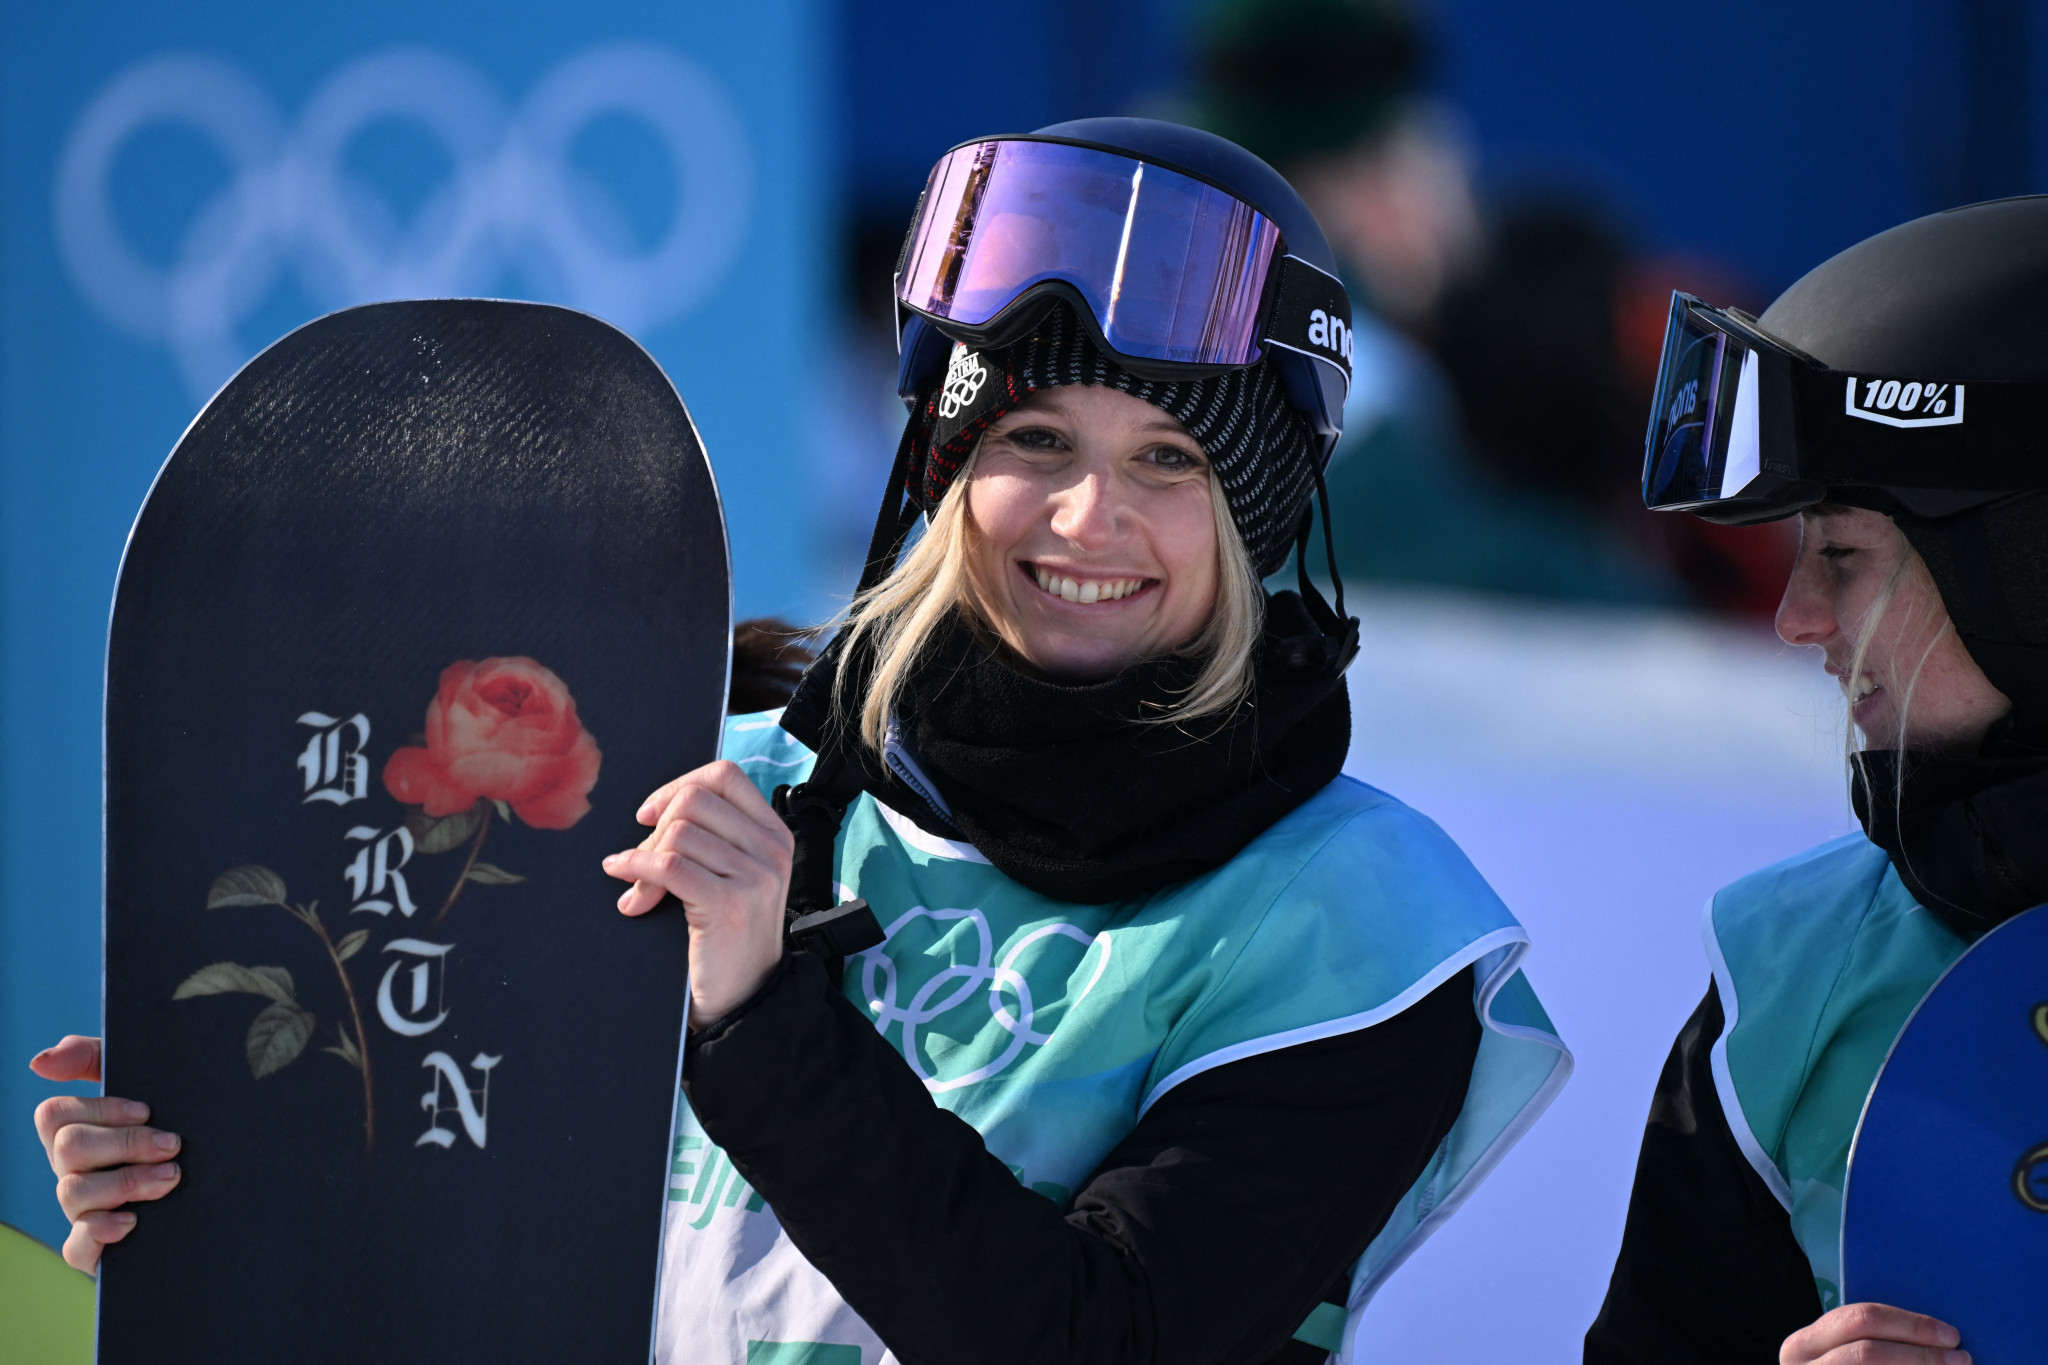 Austria's Anna Gasser won the women's Olympic big air title for the second consecutive time at Beijing 2022 after winning in Pyeongchang four years ago ©Getty Images